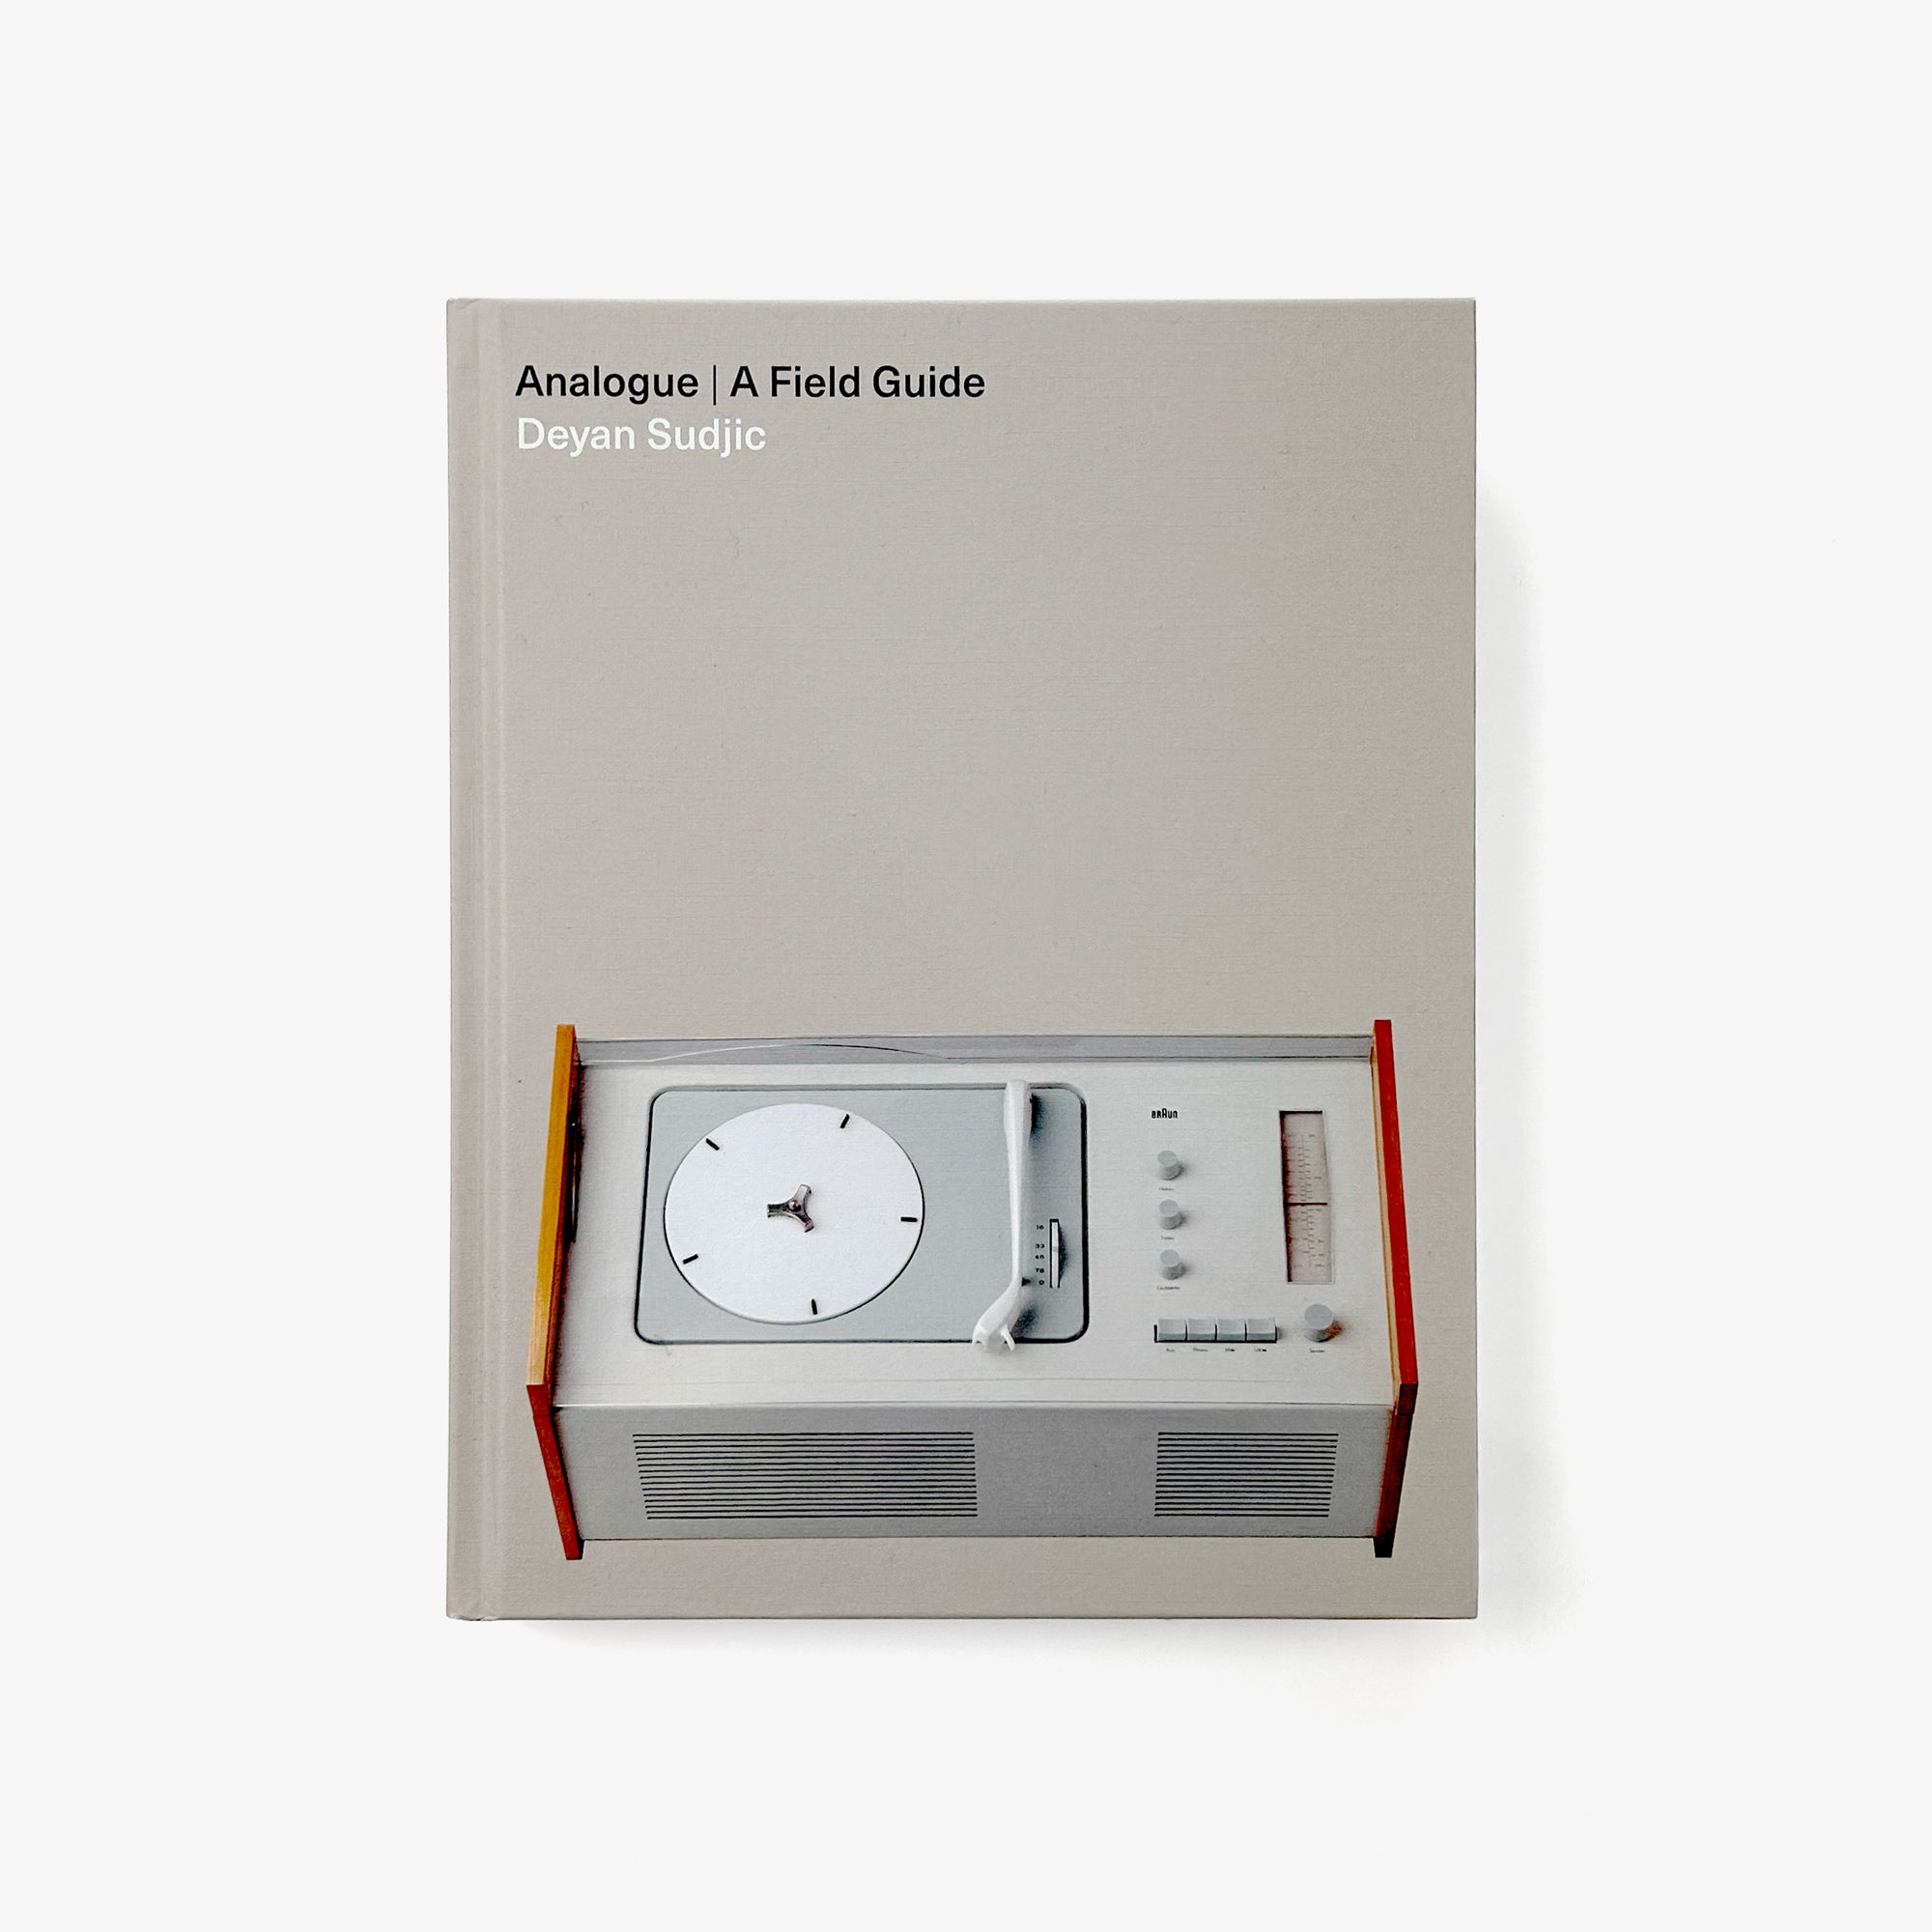 Analogue: A Field Guide